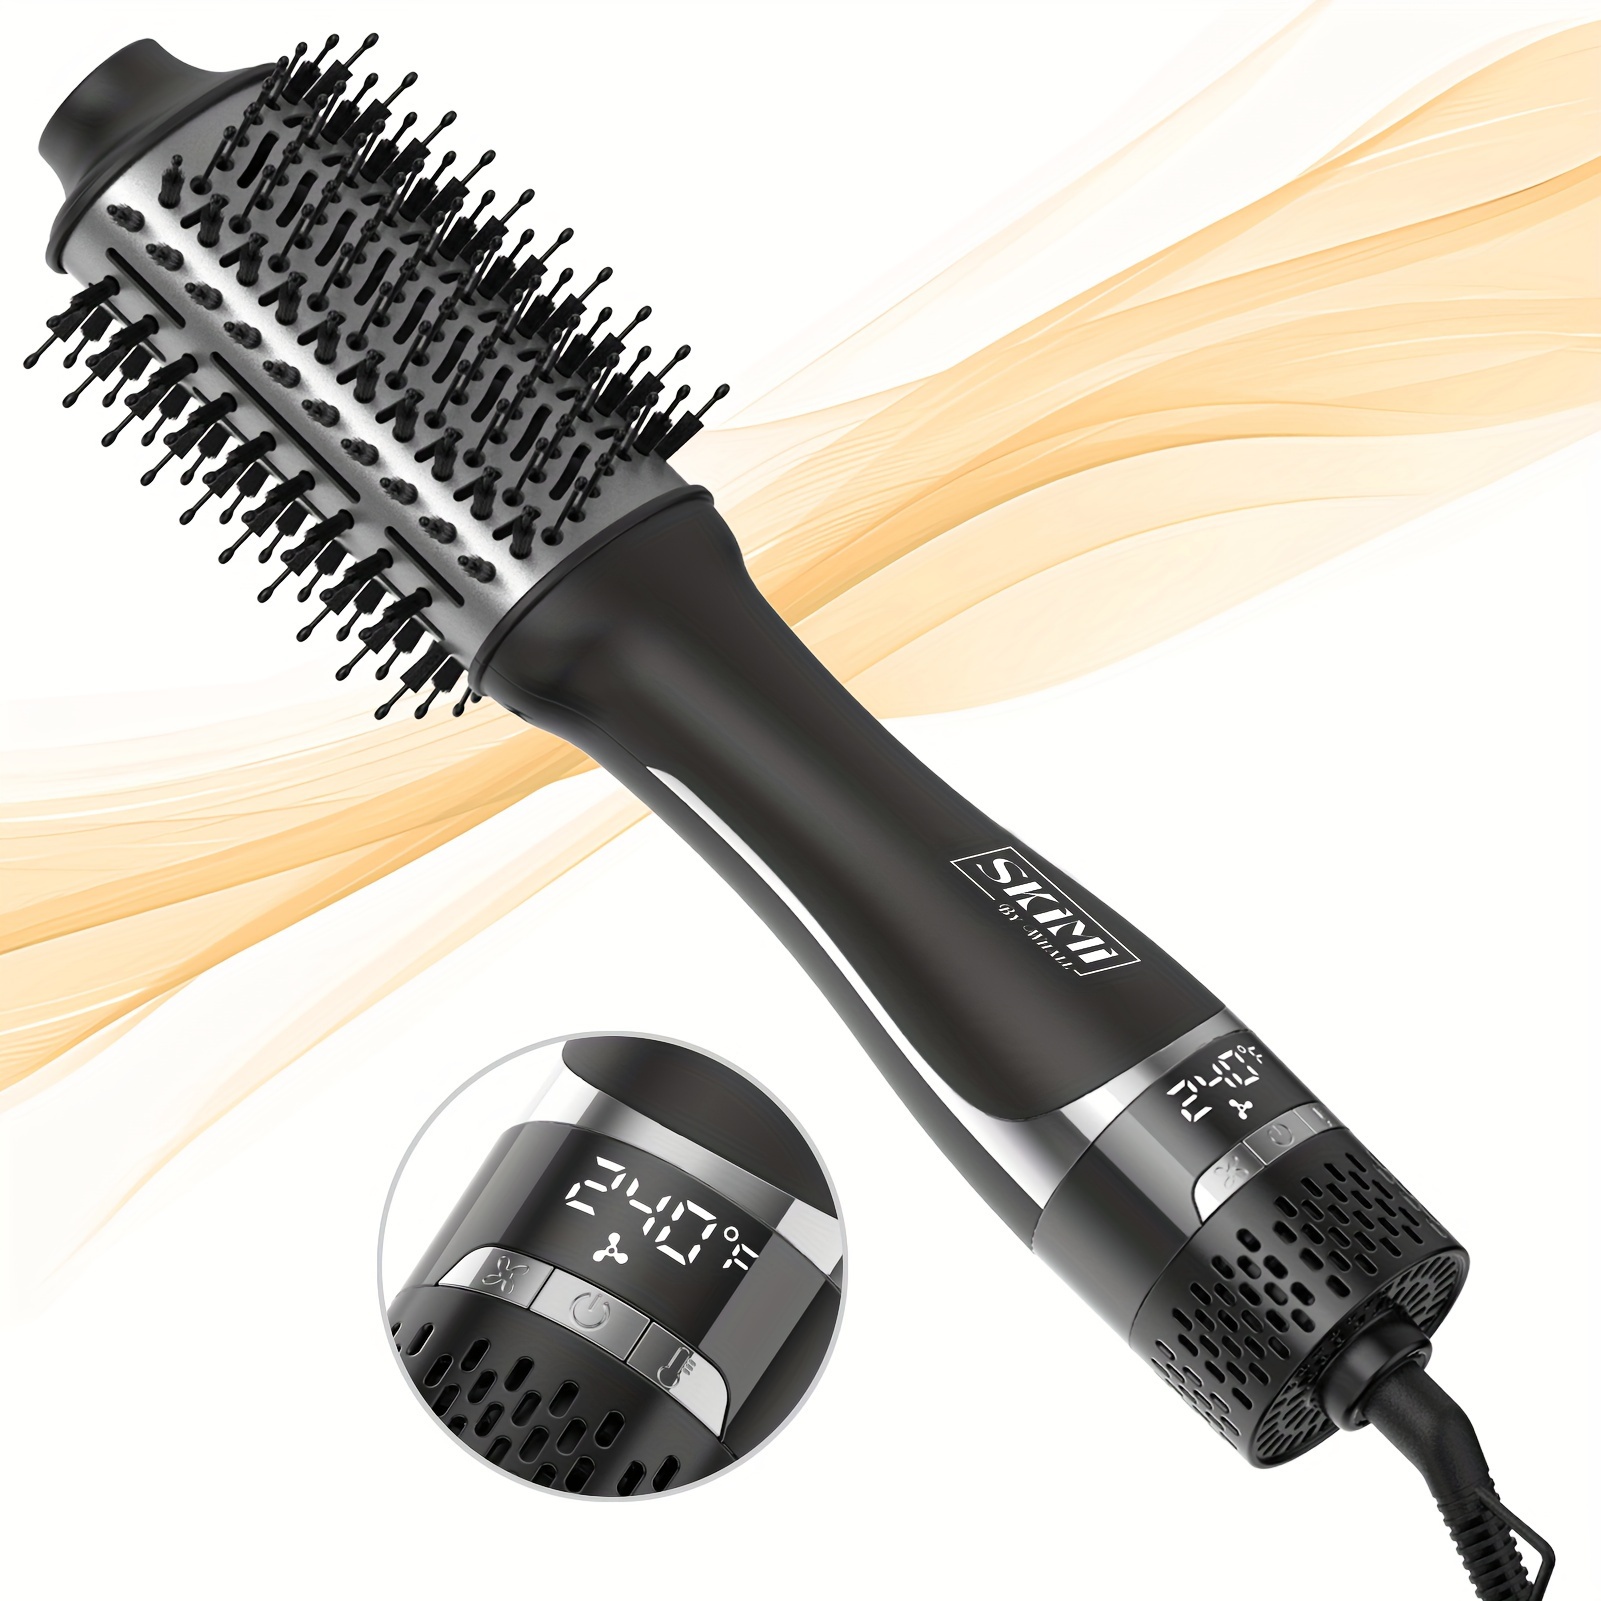 

Whall Hair Dryer Brush Blow Dryer Brush In One, Blow Dryer Brush For Women, 1 Step Blowout Brush With A Display Screen, Oval Ceramic Barrel, Black And Silver